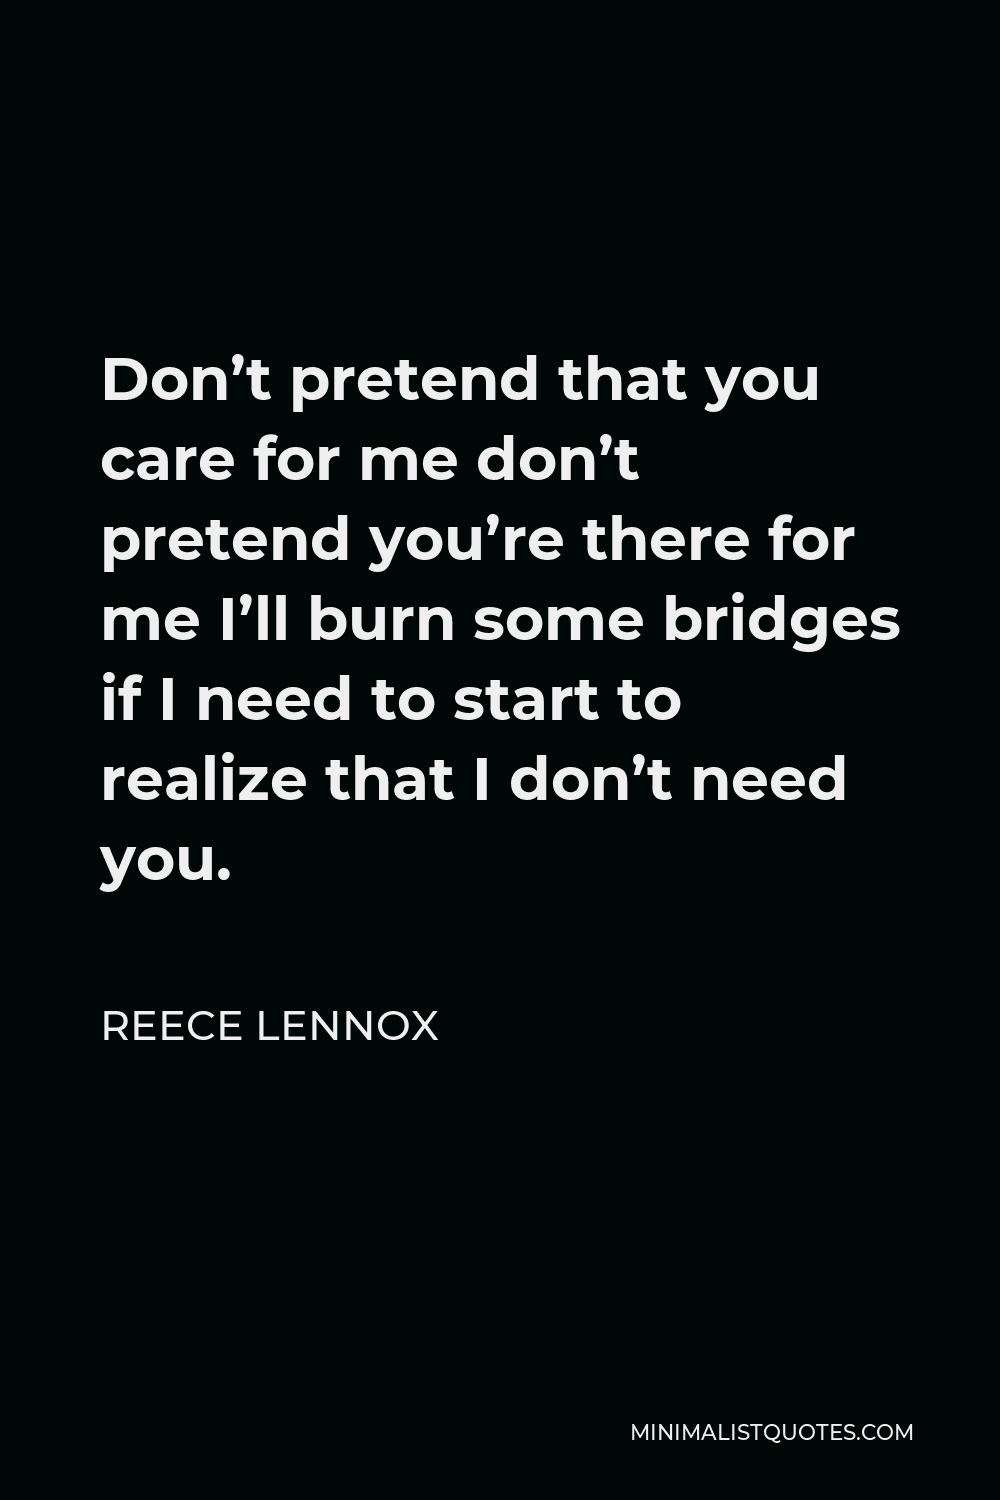 Reece Lennox Quote - Don’t pretend that you care for me don’t pretend you’re there for me I’ll burn some bridges if I need to start to realize that I don’t need you.